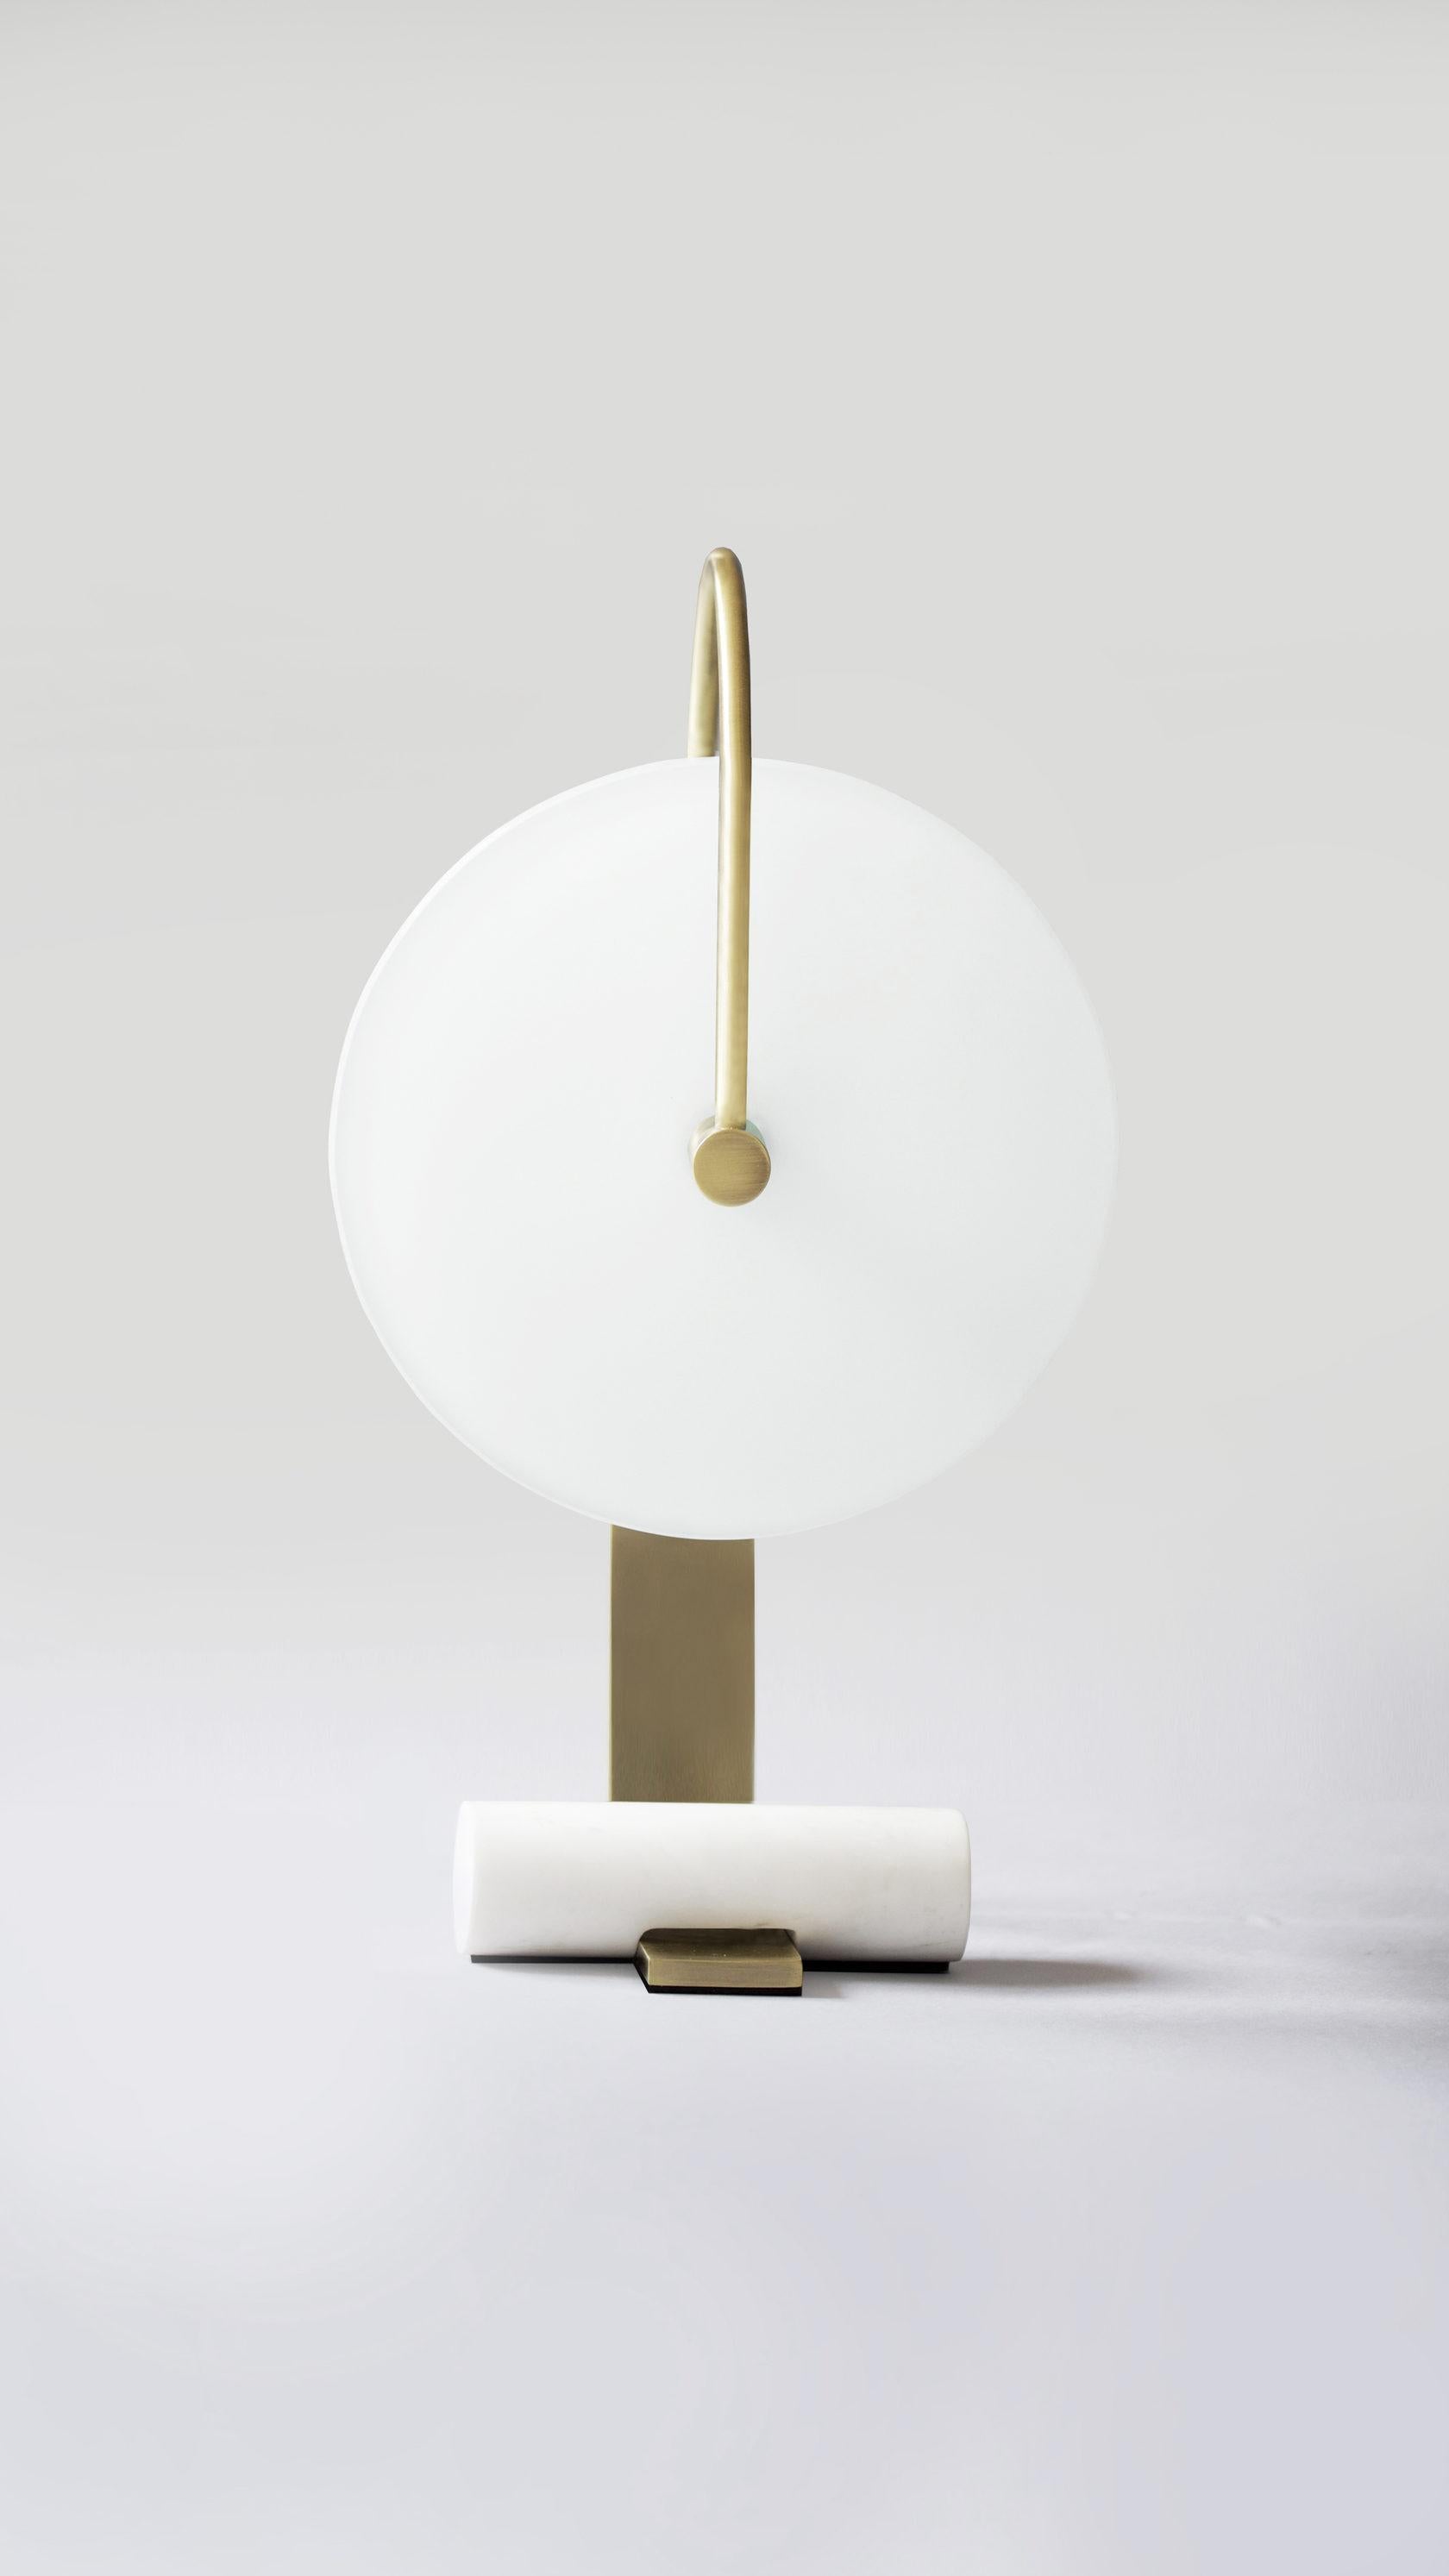 Set of 2 Brass Universe Table Lamps by Square in Circle
Dimensions: H 43.5 x W 19 x D 7 cm
Materials: Brushed brass, white frosted glass, white onyx marble

Our glass disc light provides an ambient glow and is held in place by a single, arched arm